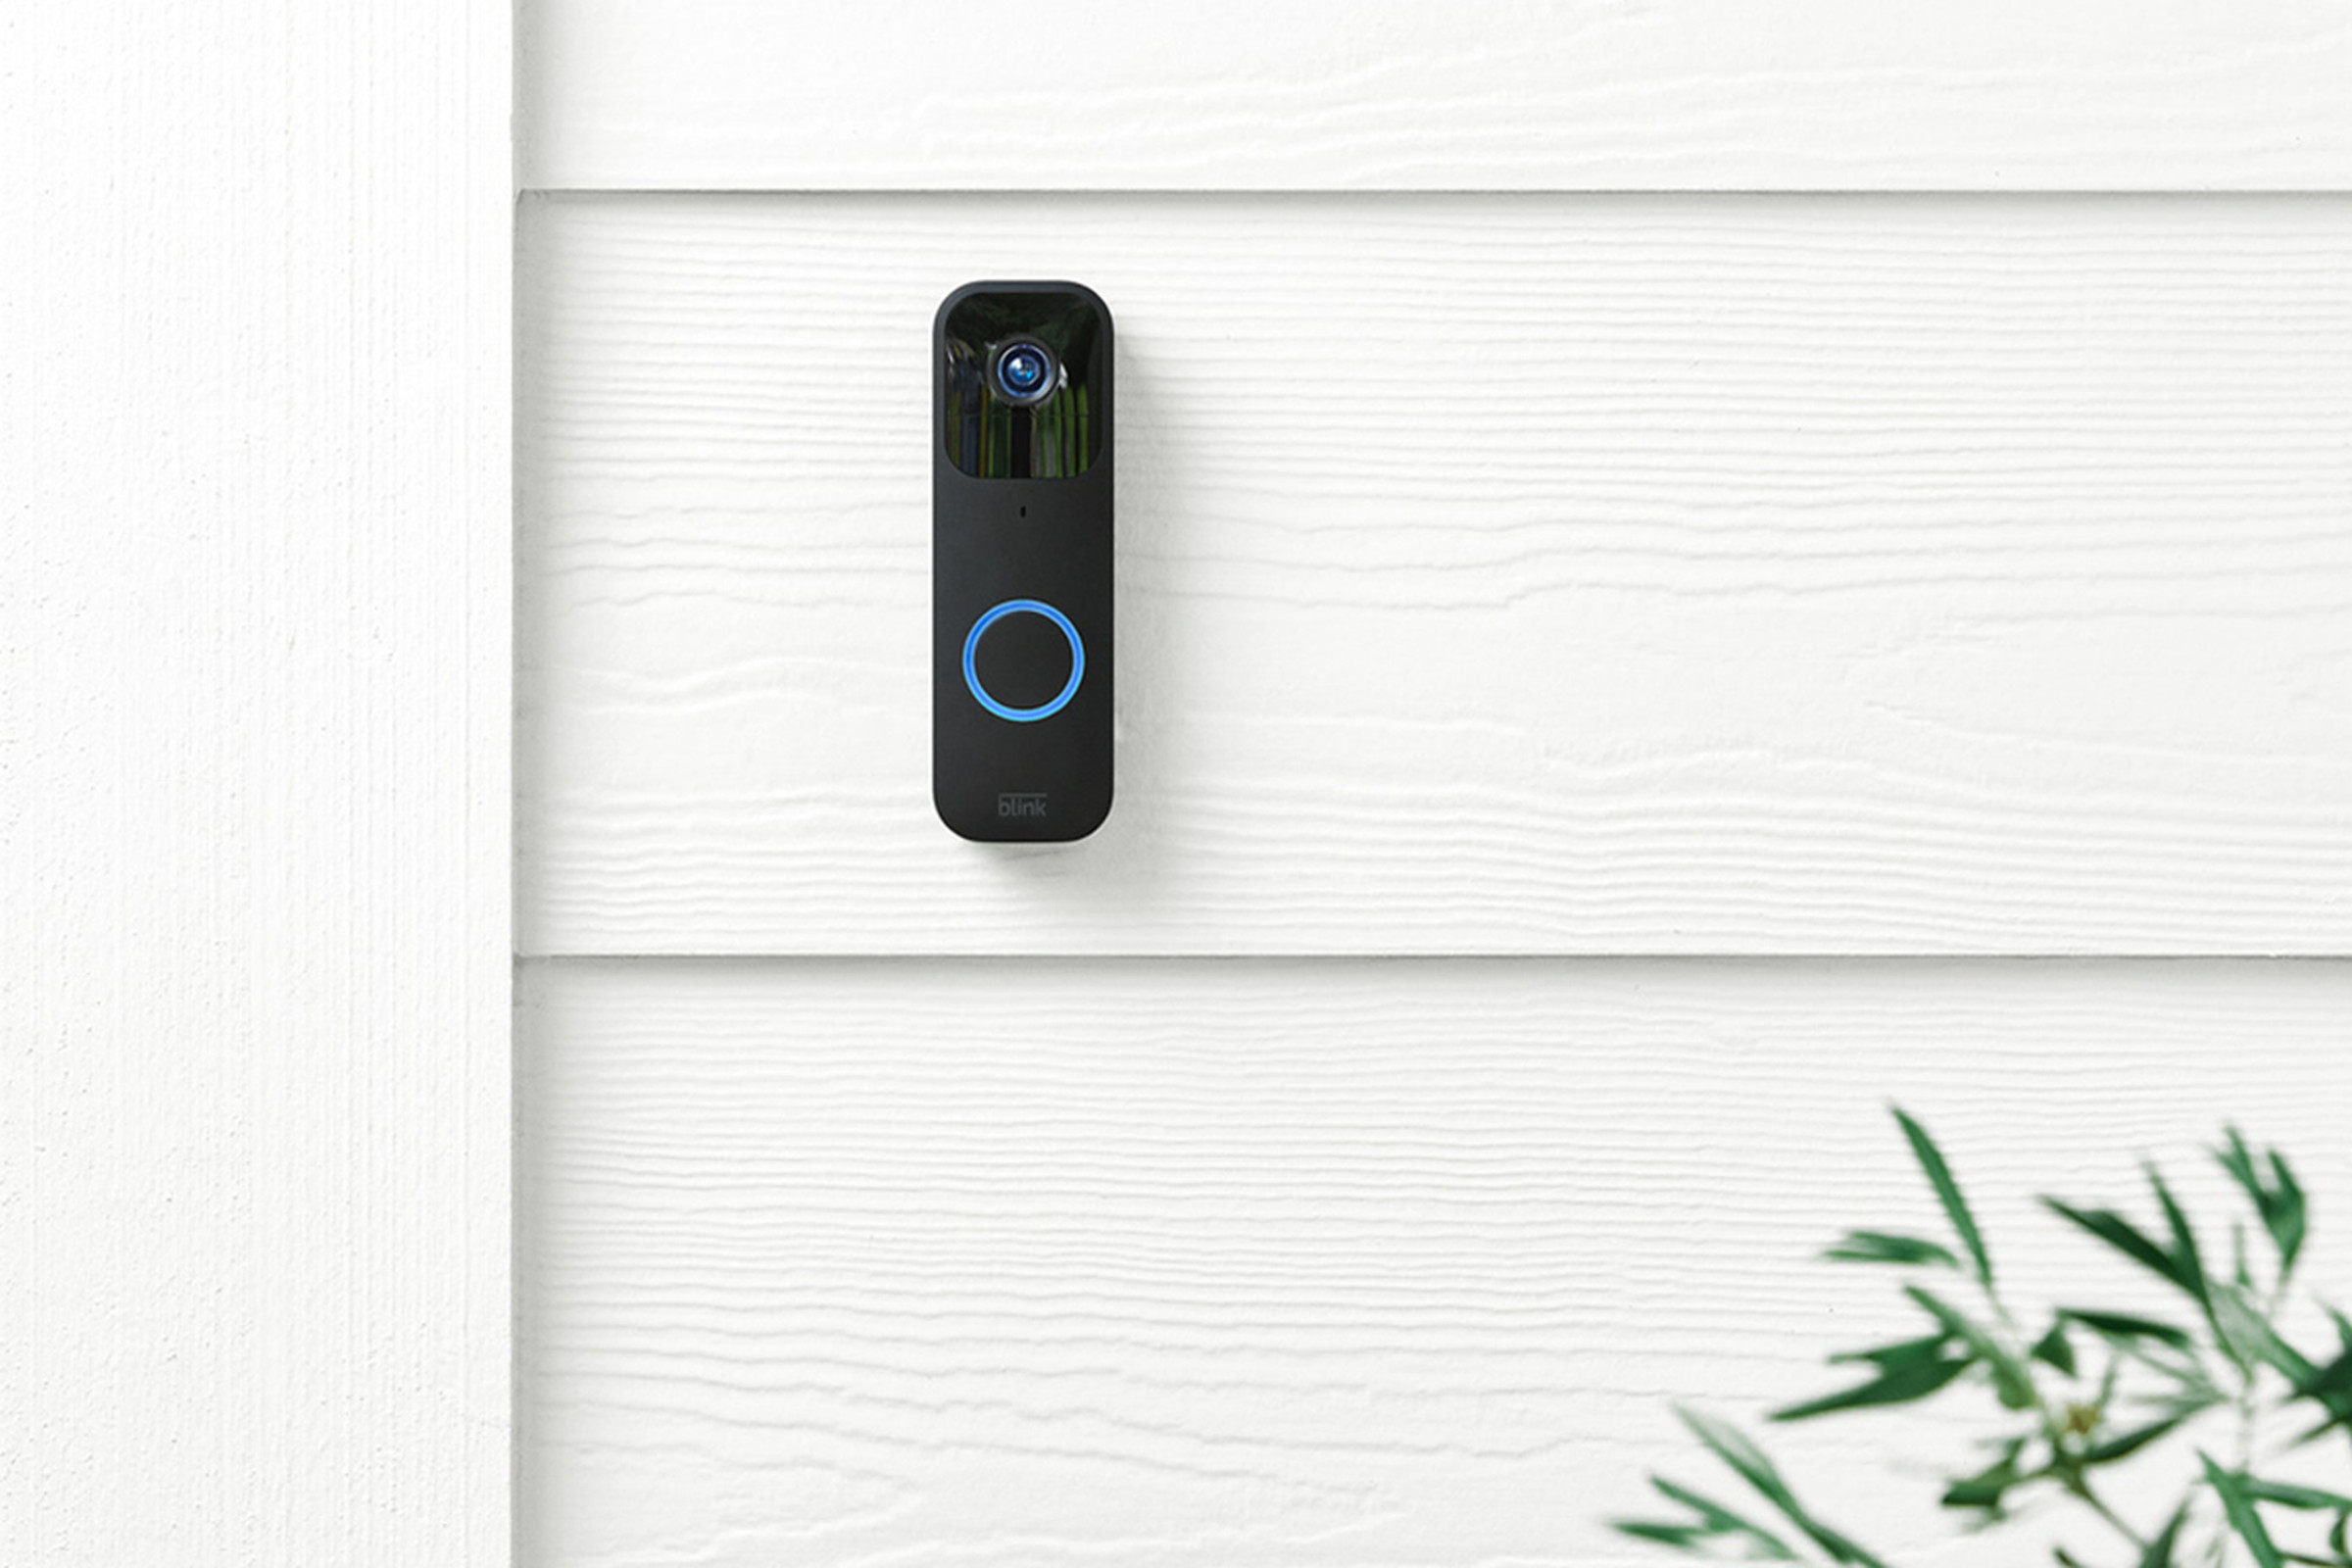 Ring’s founder Jamie Siminoff announced a new video doorbell this week, from another company.